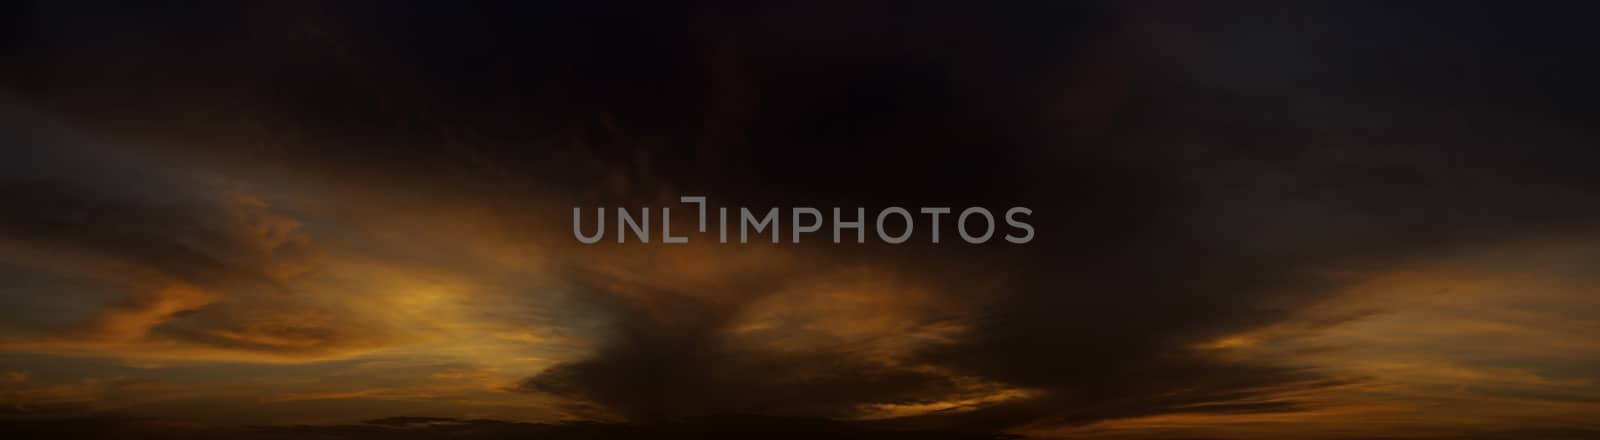 Cloudy sky with sunset light panorama view by pixbox77